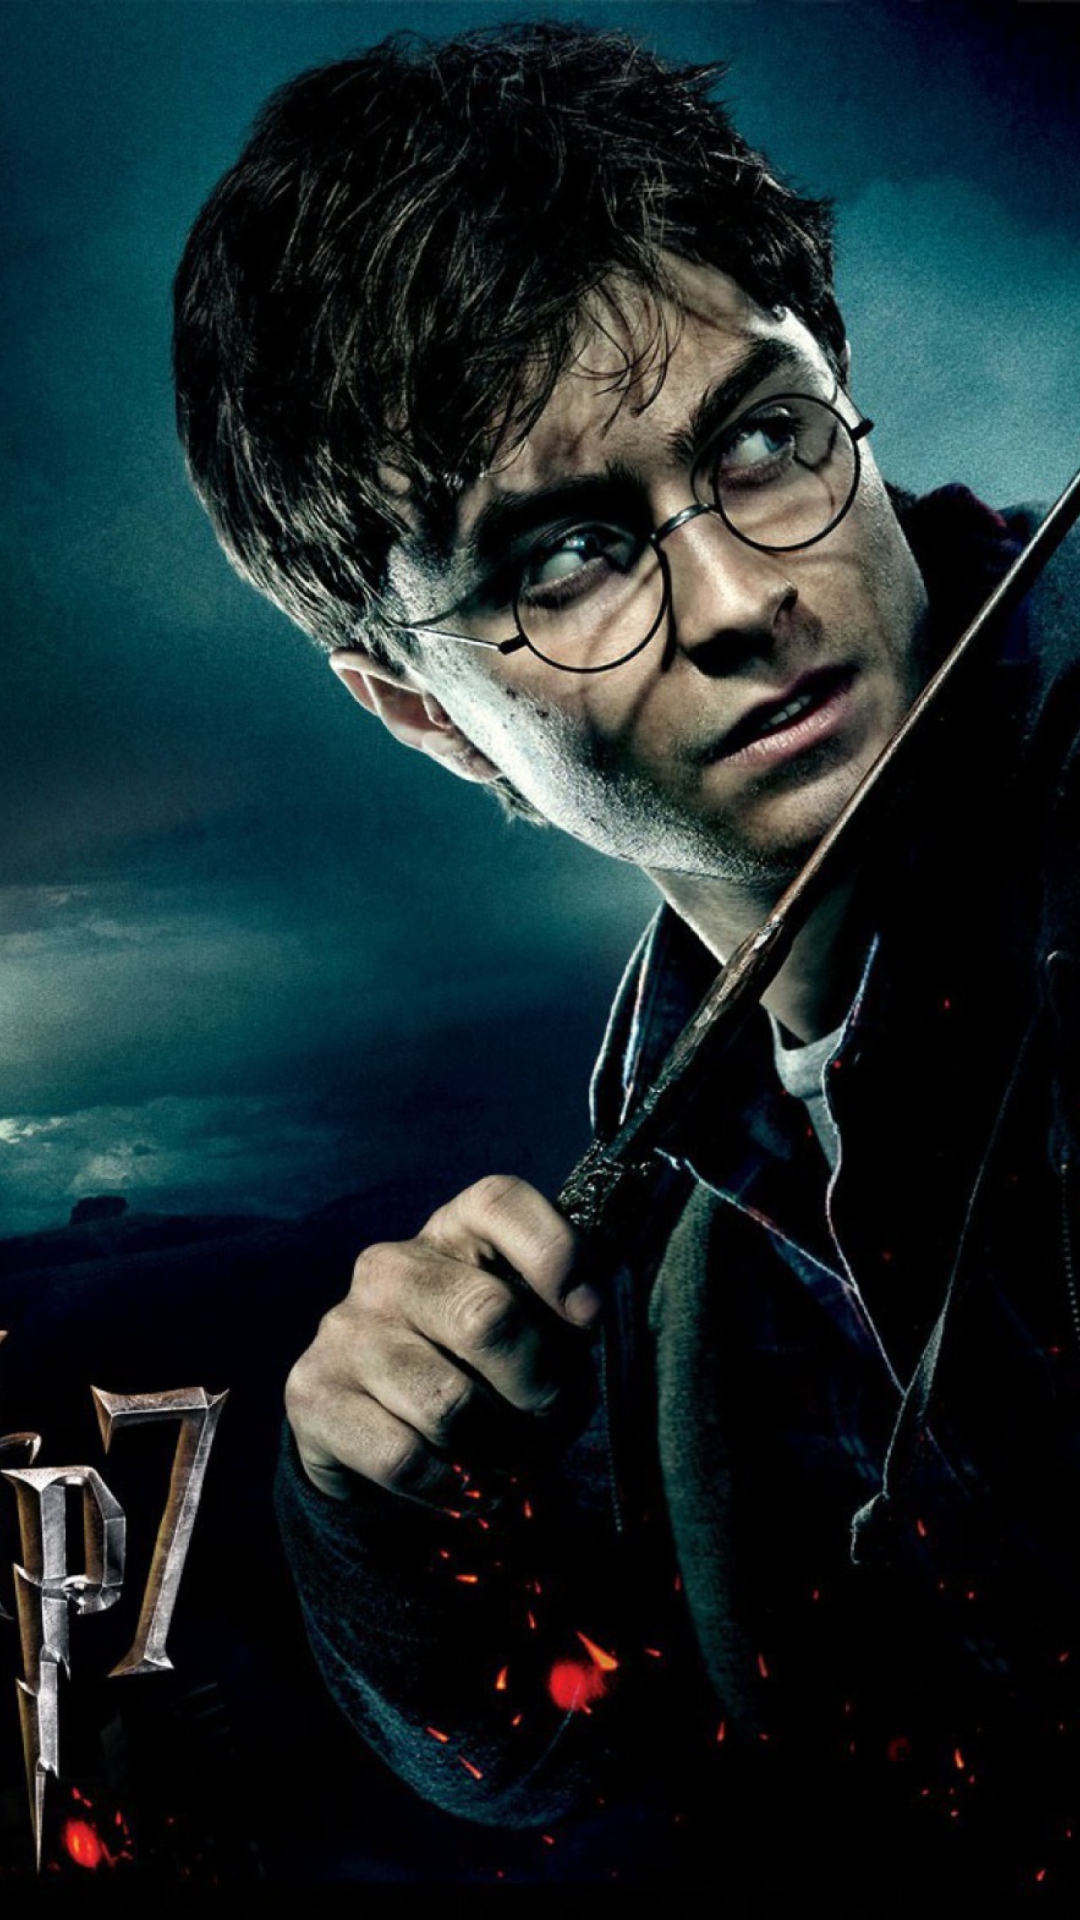 Harry Potter And The Deathly Hallows Part-1 wallpaper 1080x1920